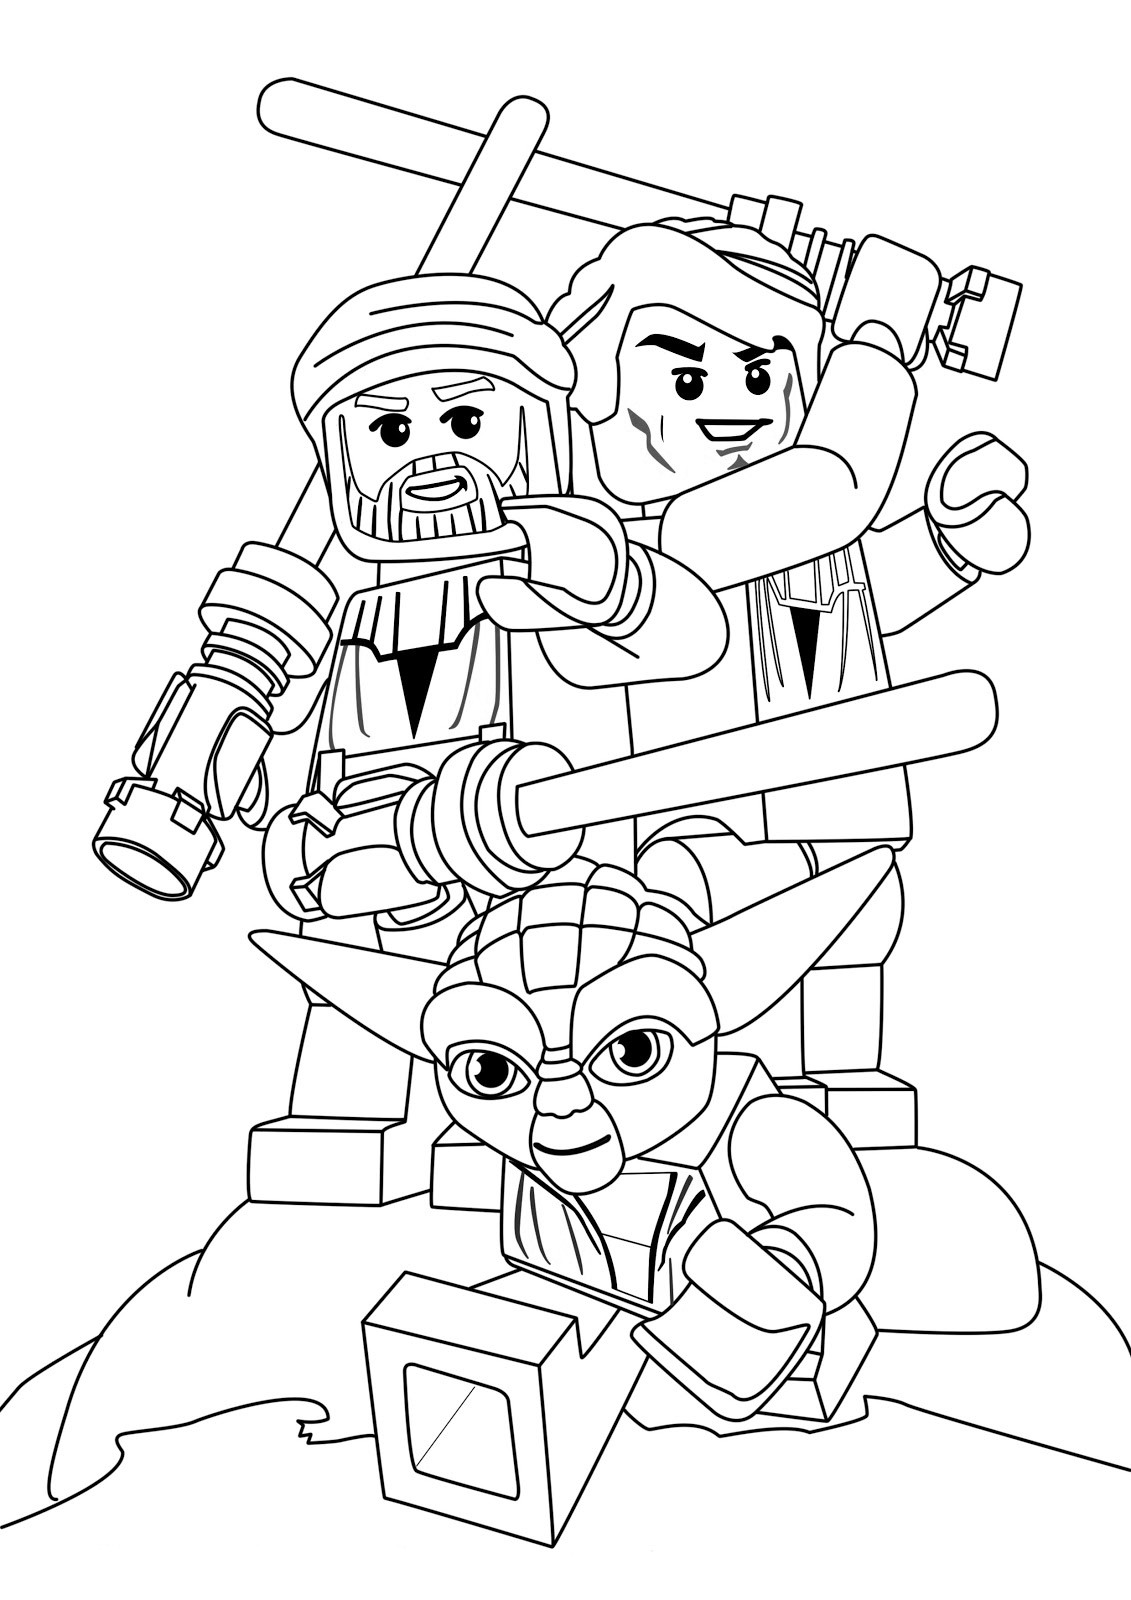 A&amp;P Coloring Book
 Lego Star Wars Coloring Pages Best Coloring Pages For Kids